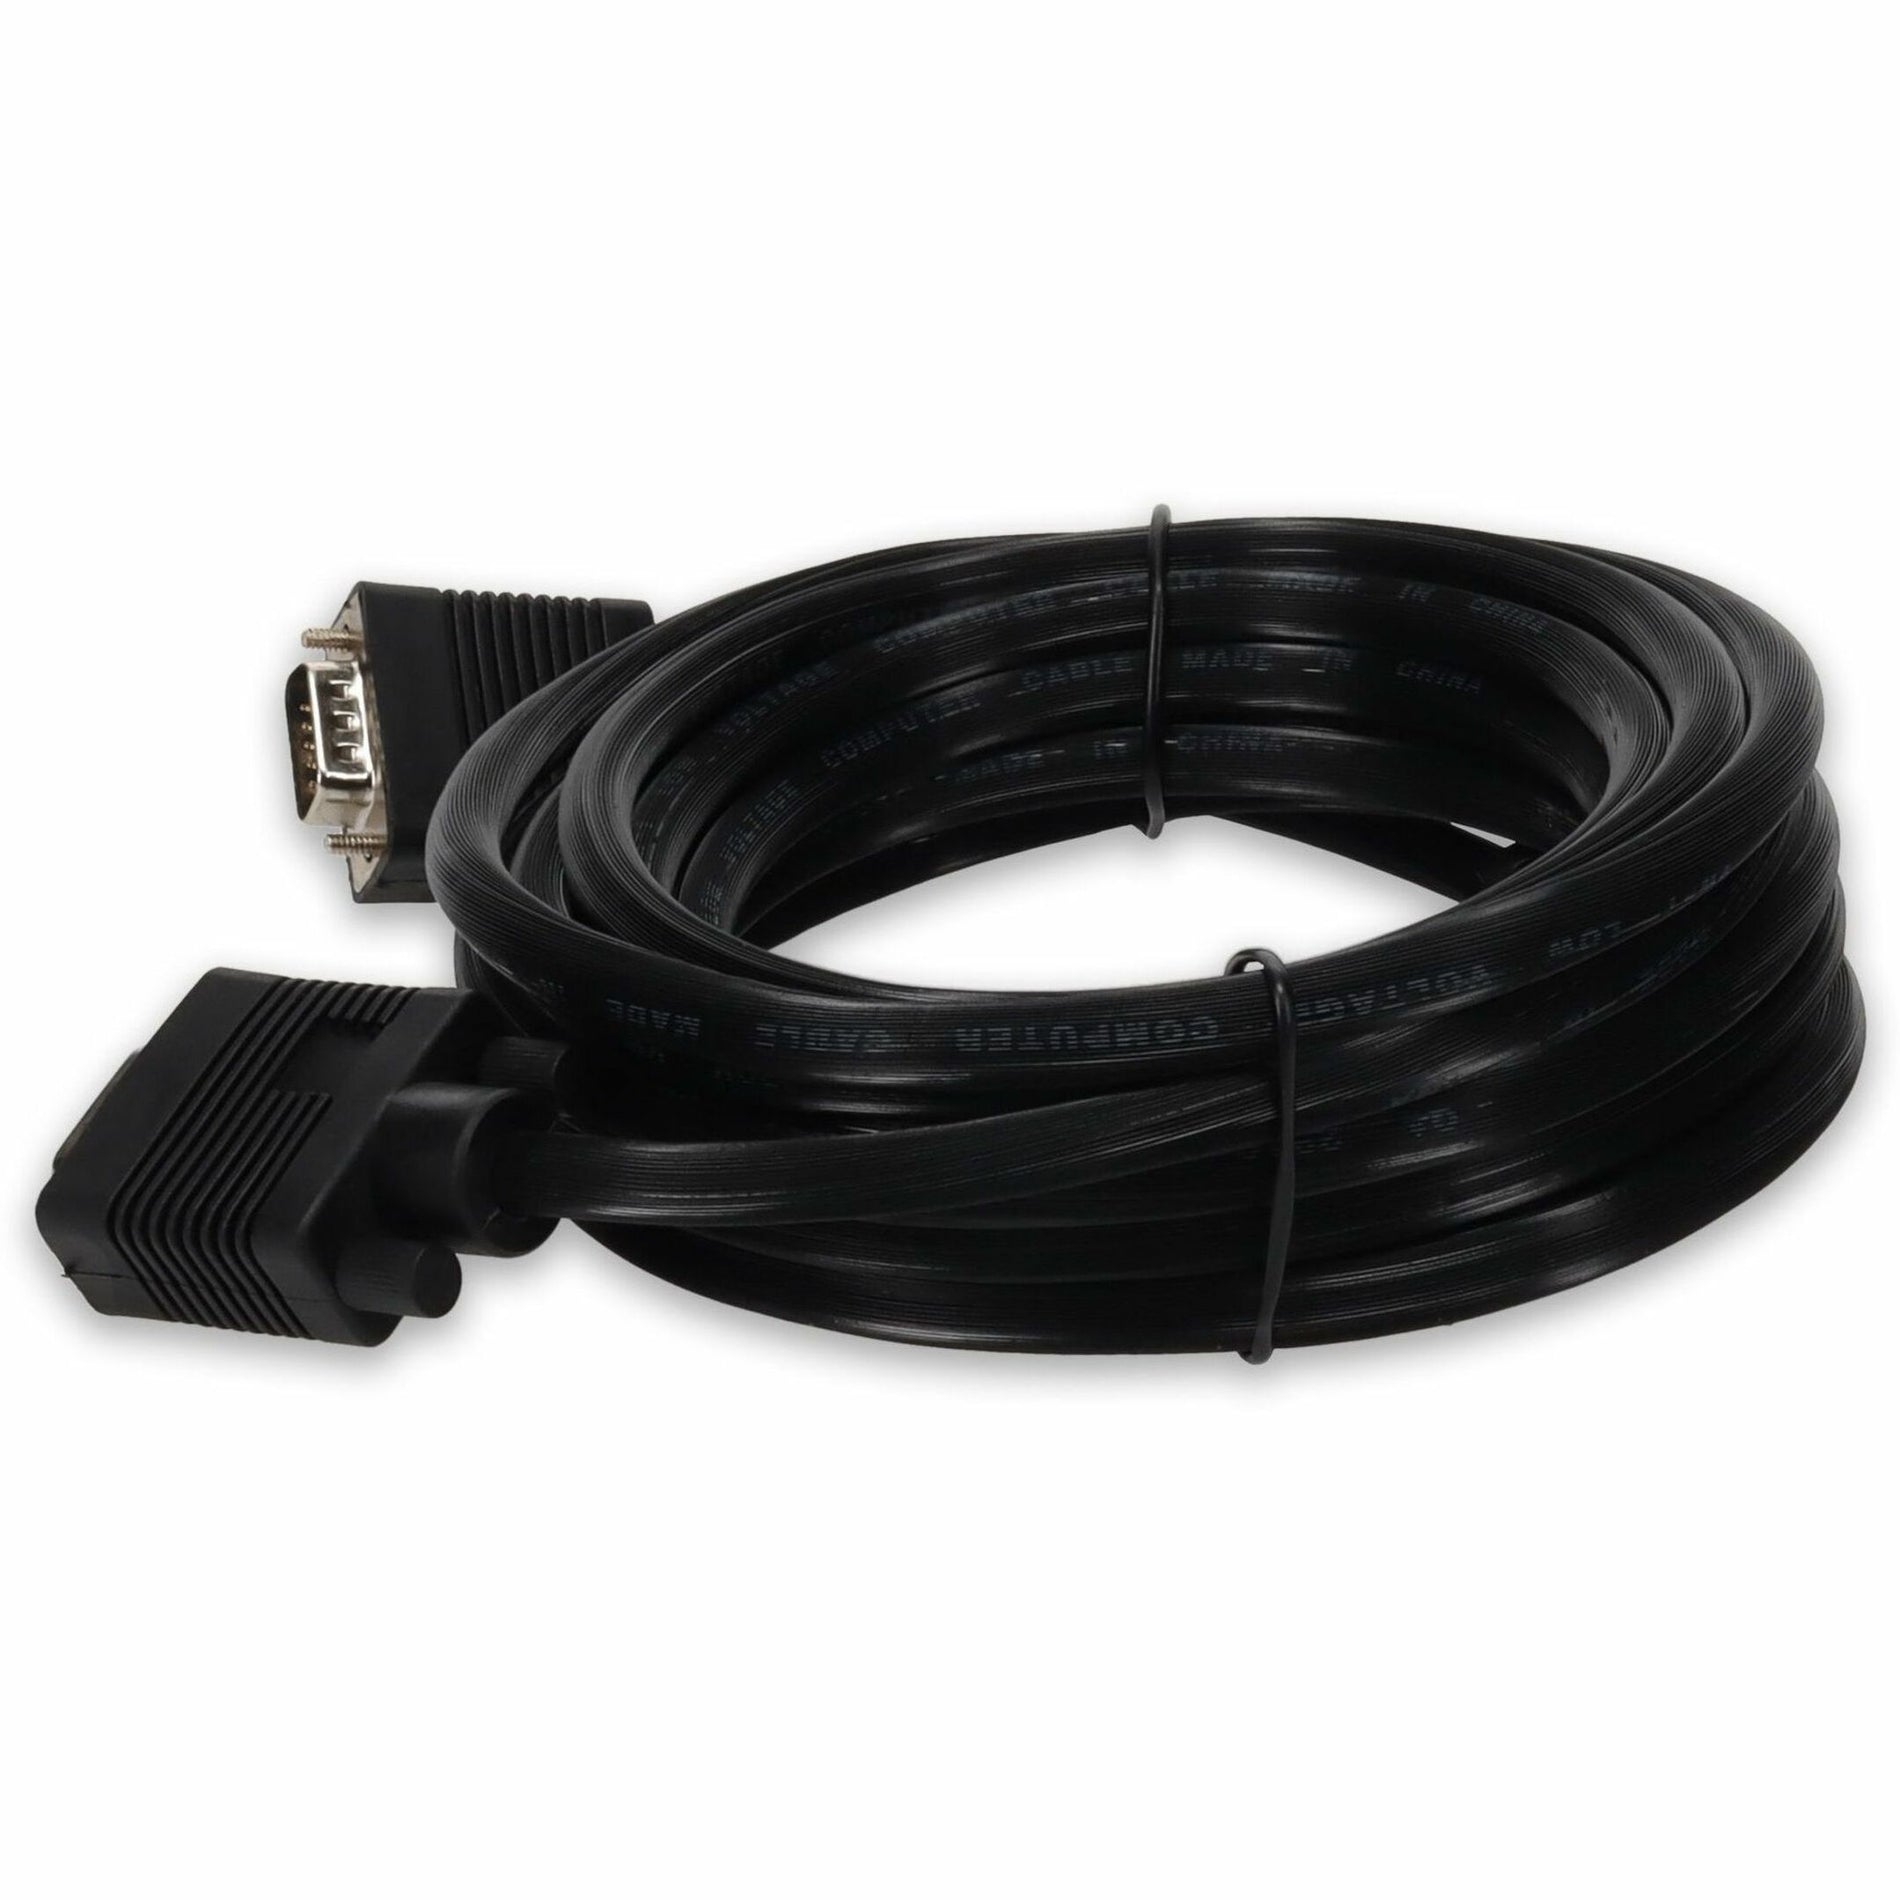 AddOn VGAMM25 25ft (7.6M) VGA High Resolution Monitor Cable - Male to Male, 3 Year Warranty, United States